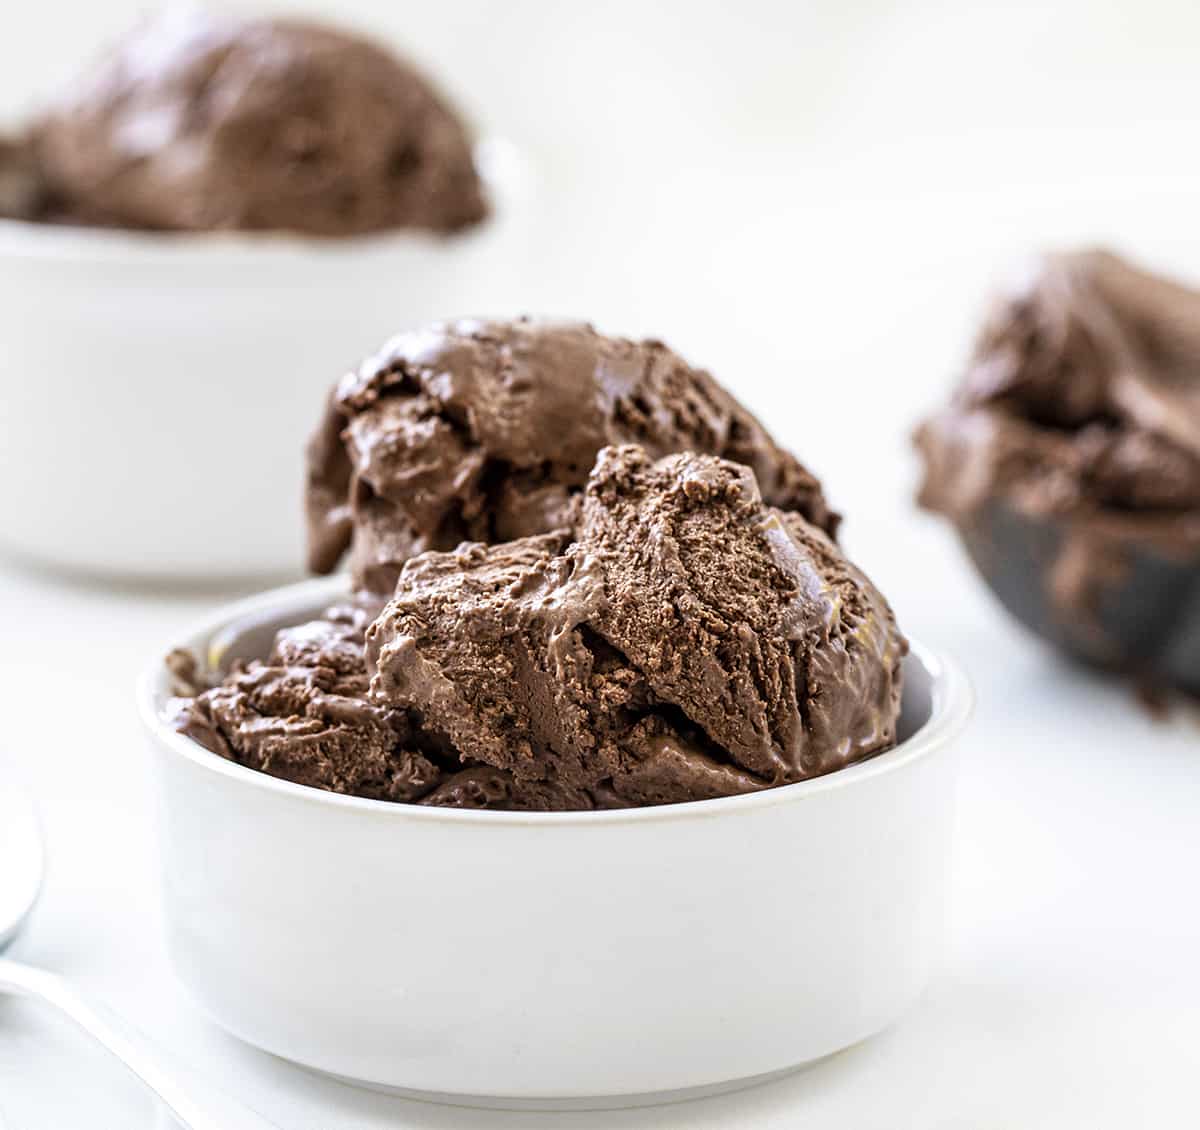 Bowls of Easy Chocolate Ice Cream on White Counter. 